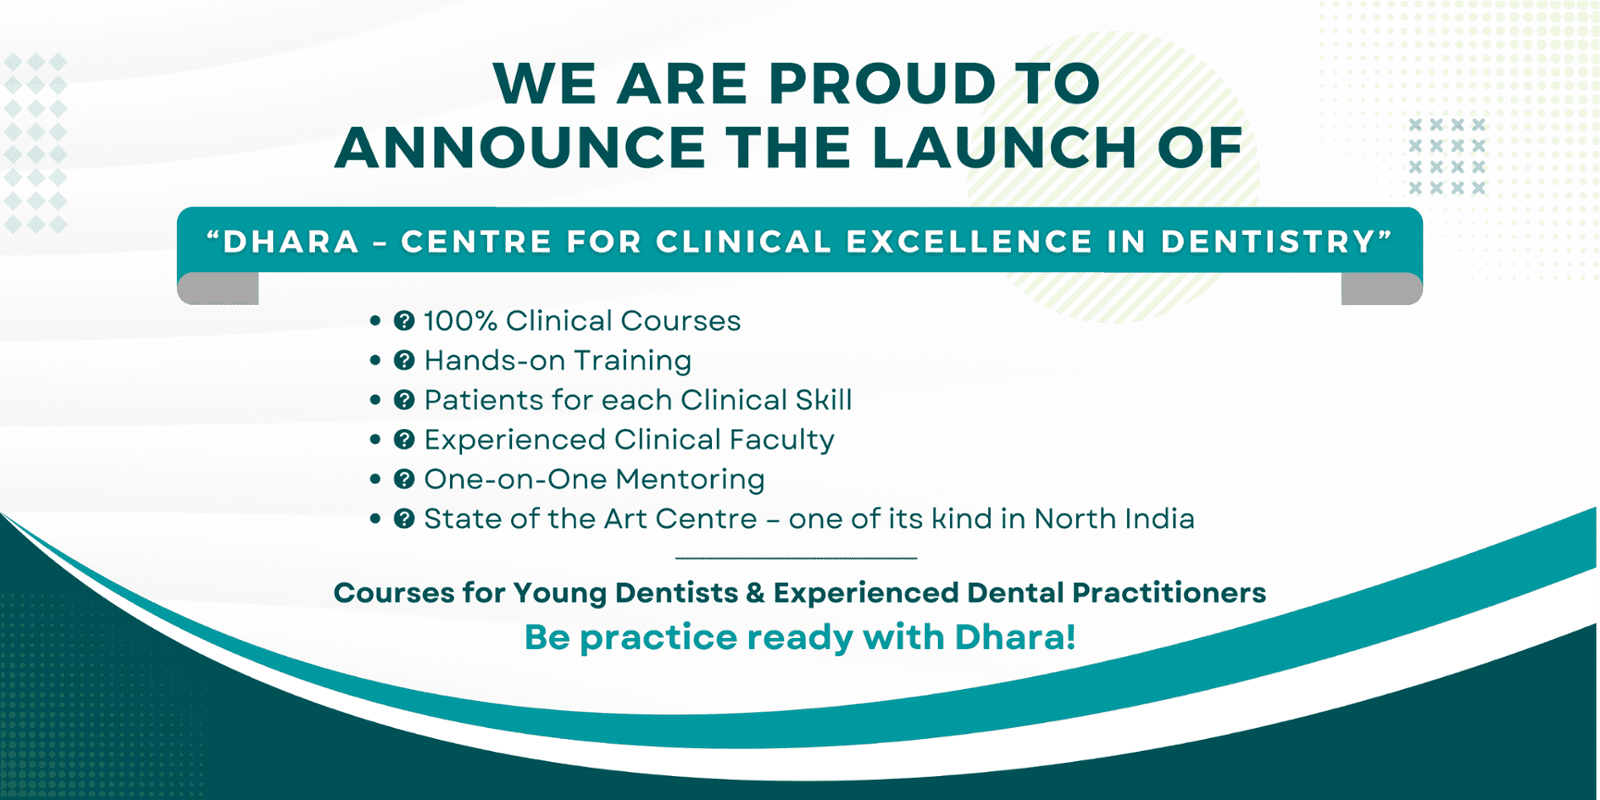 Dhara – Centre for Clinical Excellence in Dentistry